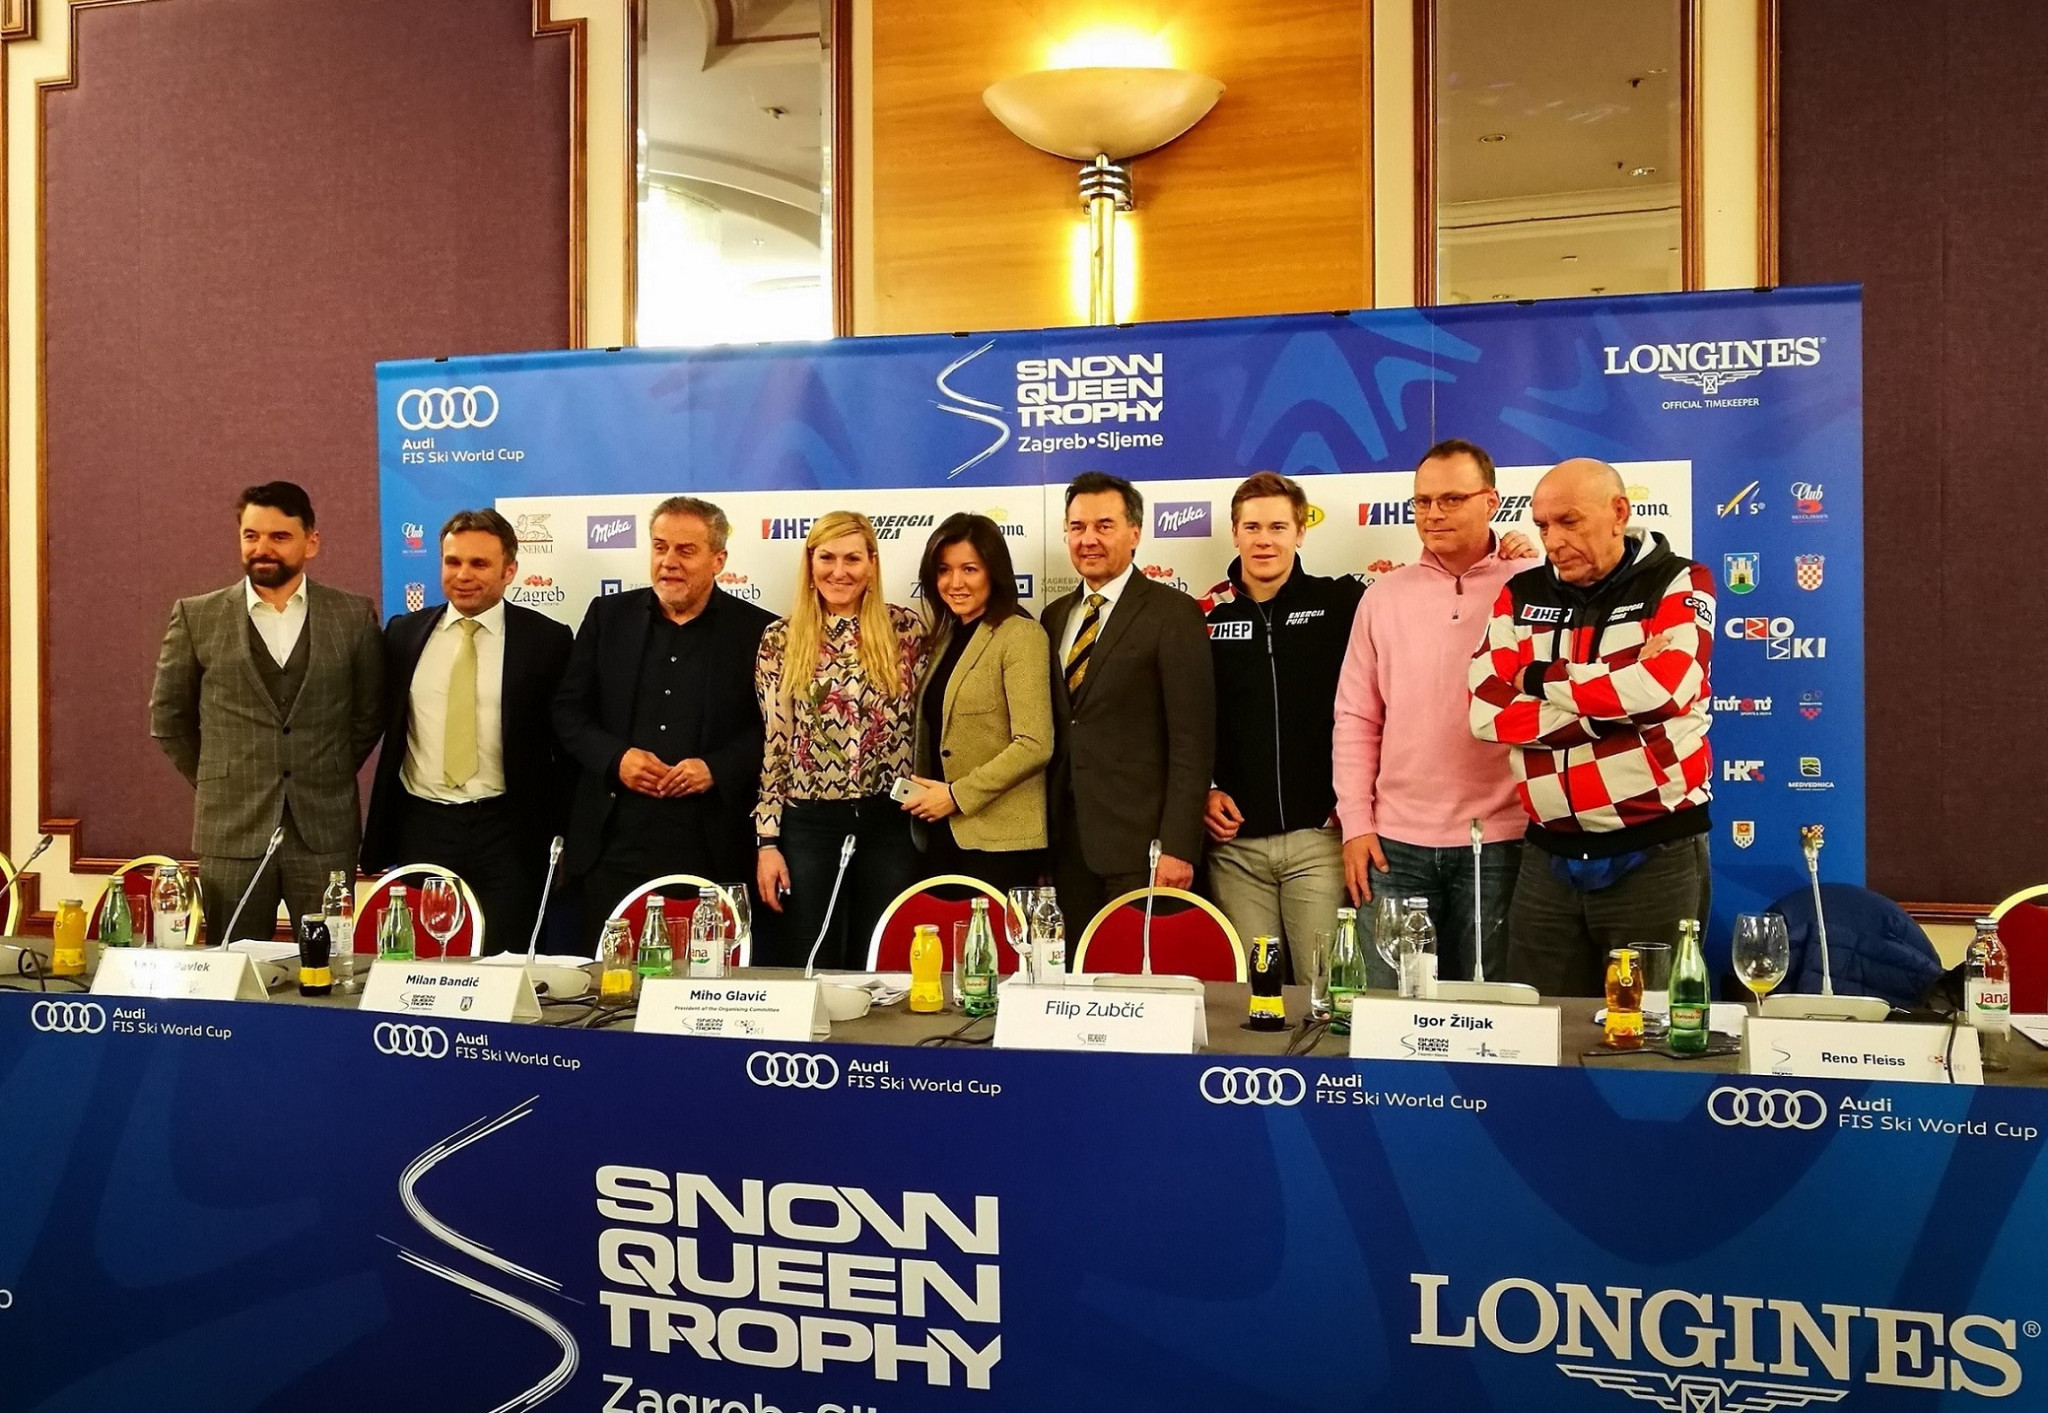 Croatian Ski Association President Miho Glavić said the event is of great importance to the development of the sport in the nation ©Snoq Queen Trophy